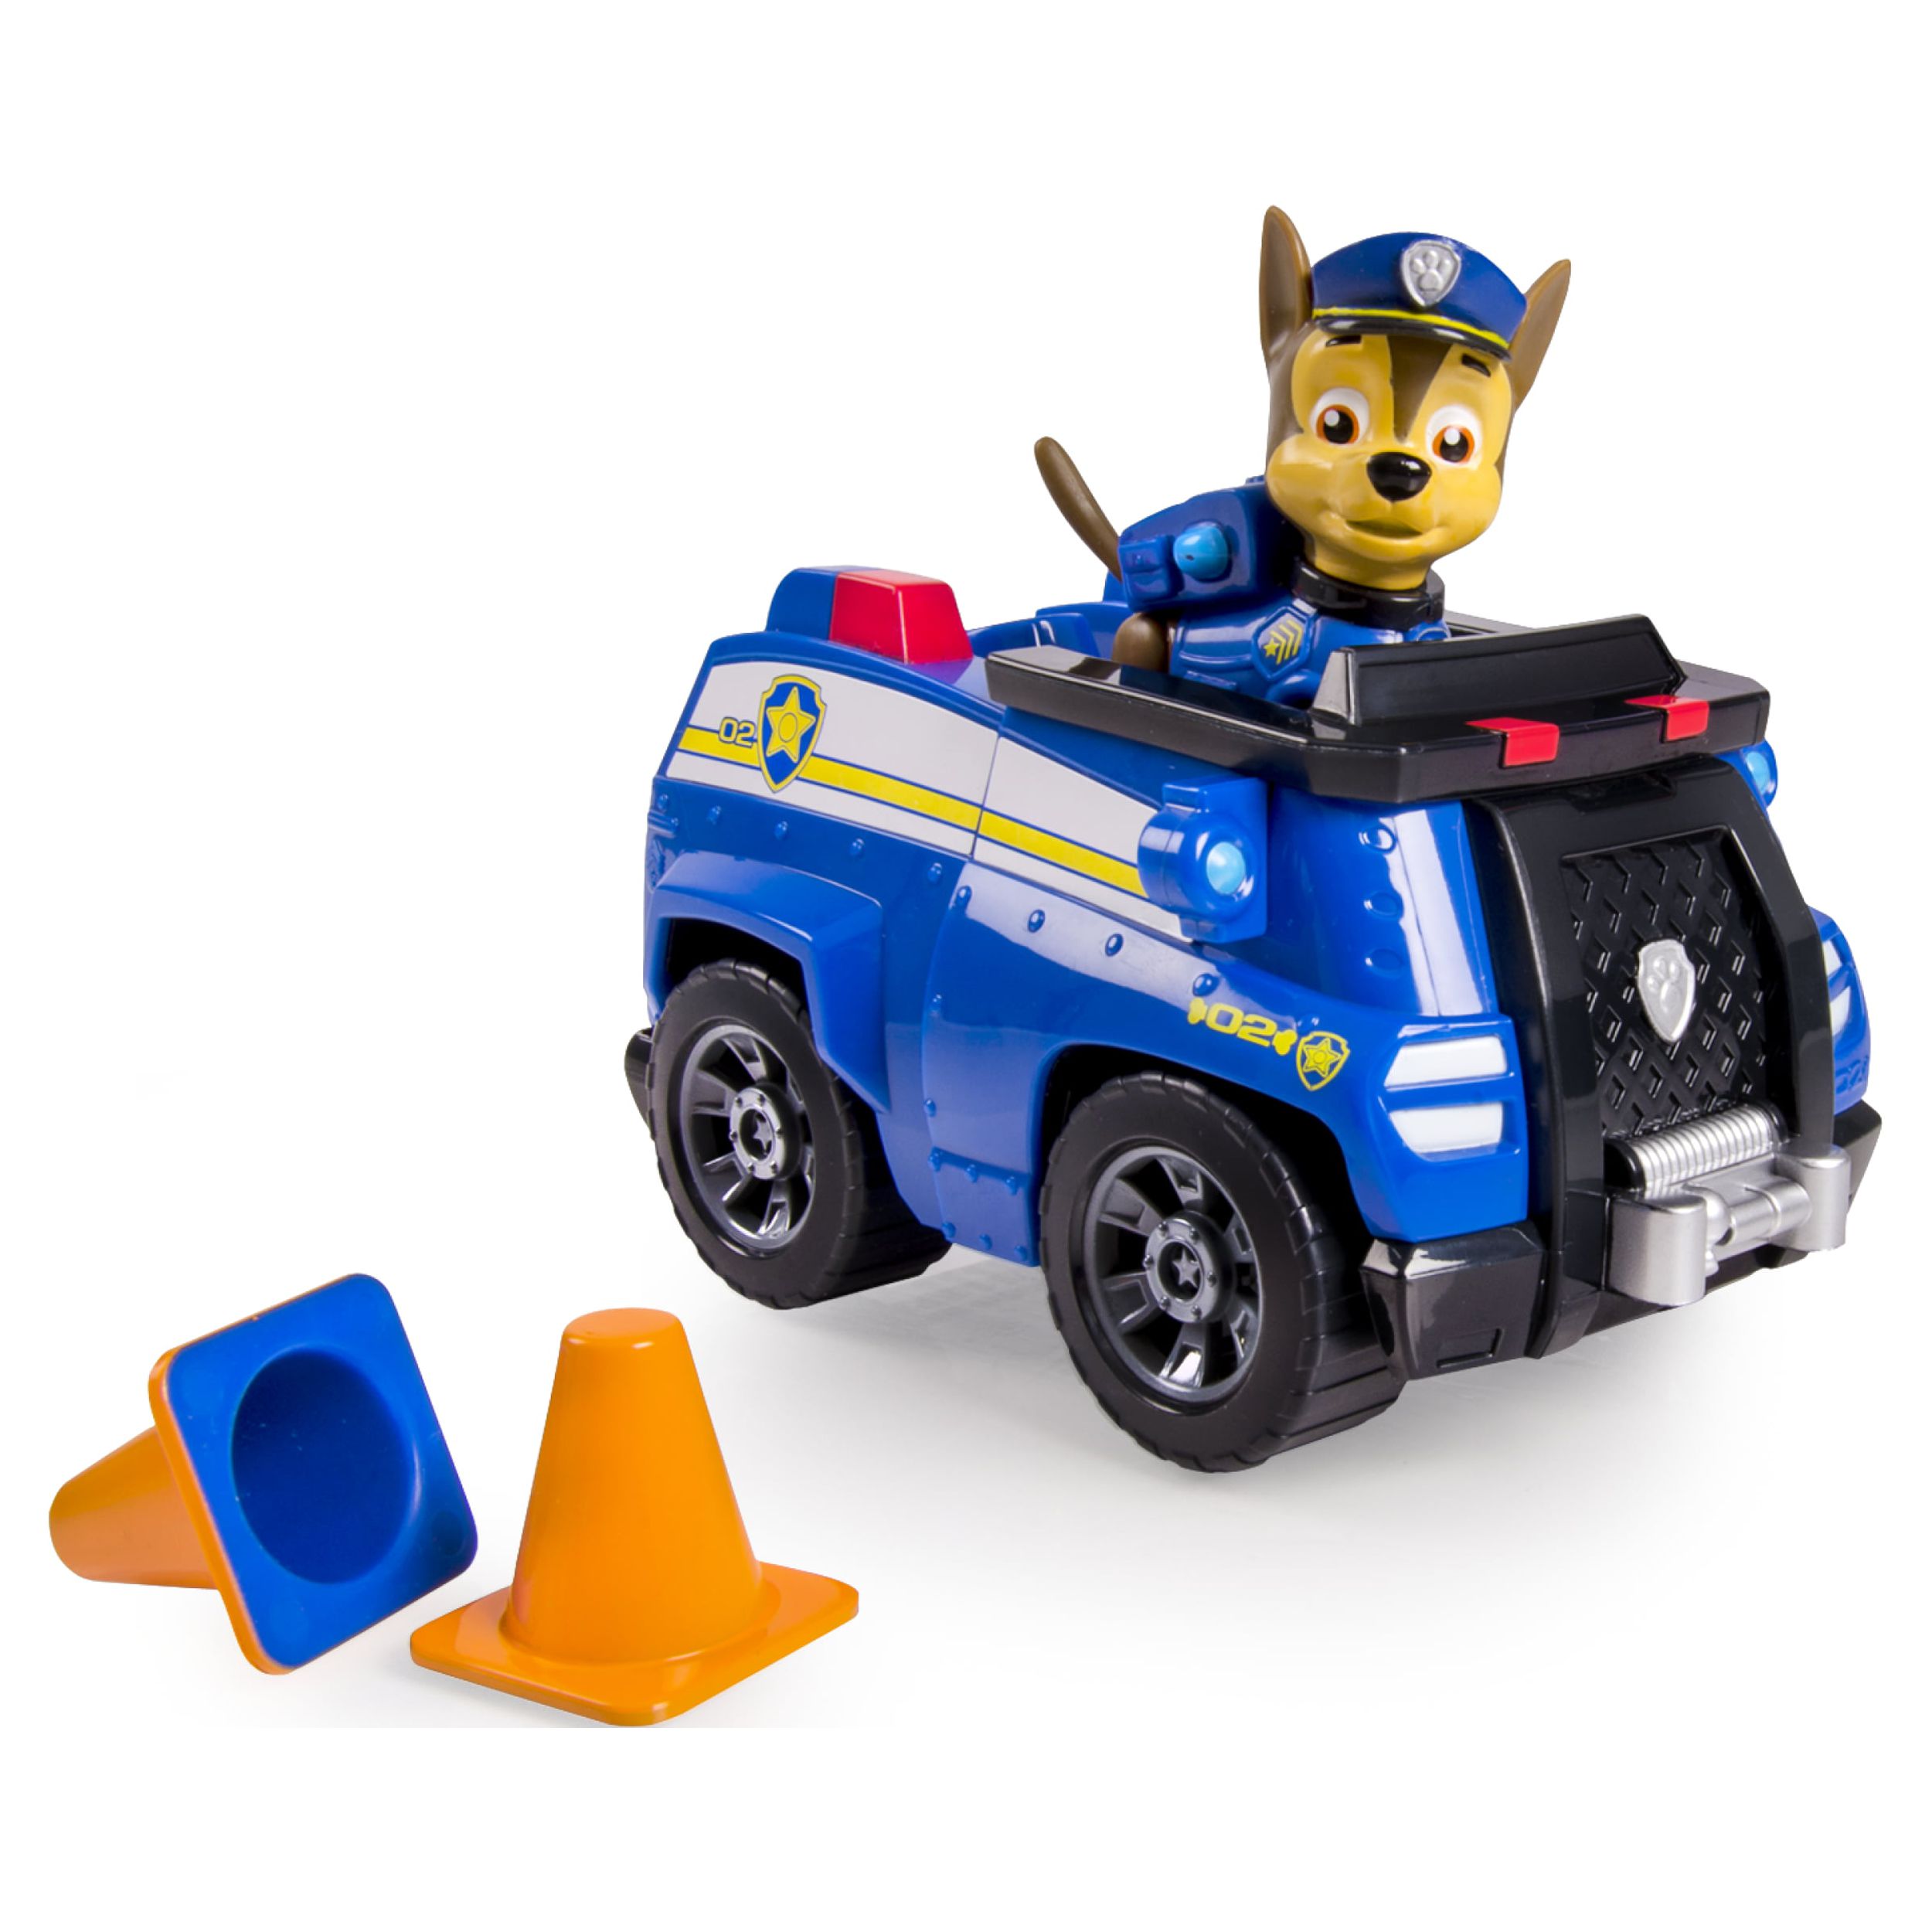 Paw Patrol Chase's Cruiser, Vehicle and Figure - image 3 of 6